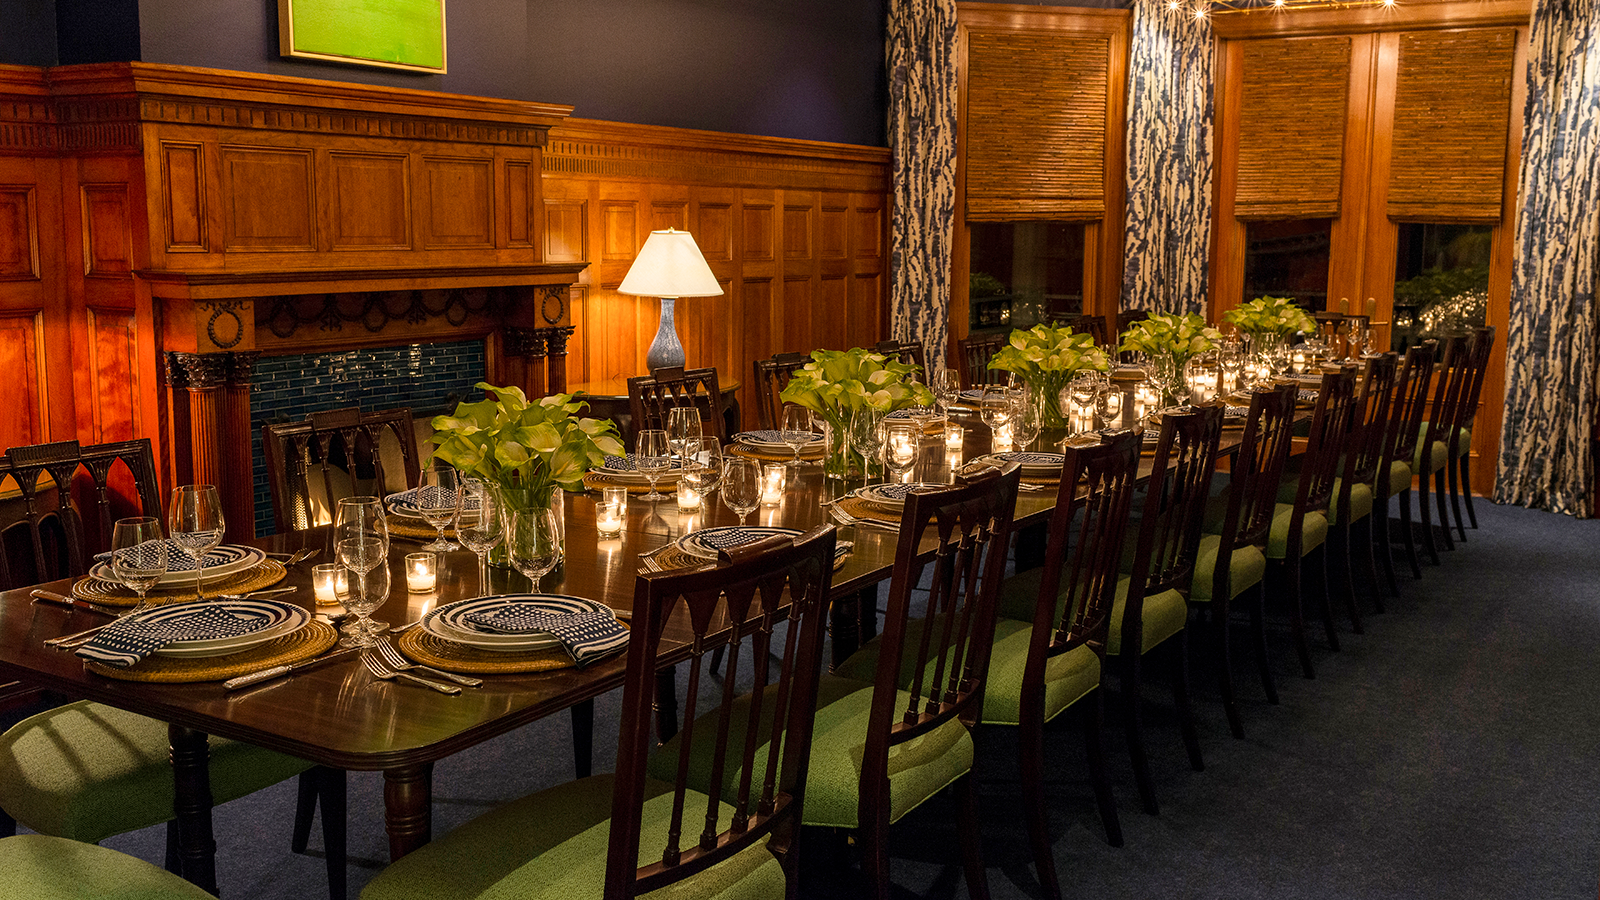 Image of Private Dining Room with a set table, the Inns of Aurora, Aurora, New York, Weddings